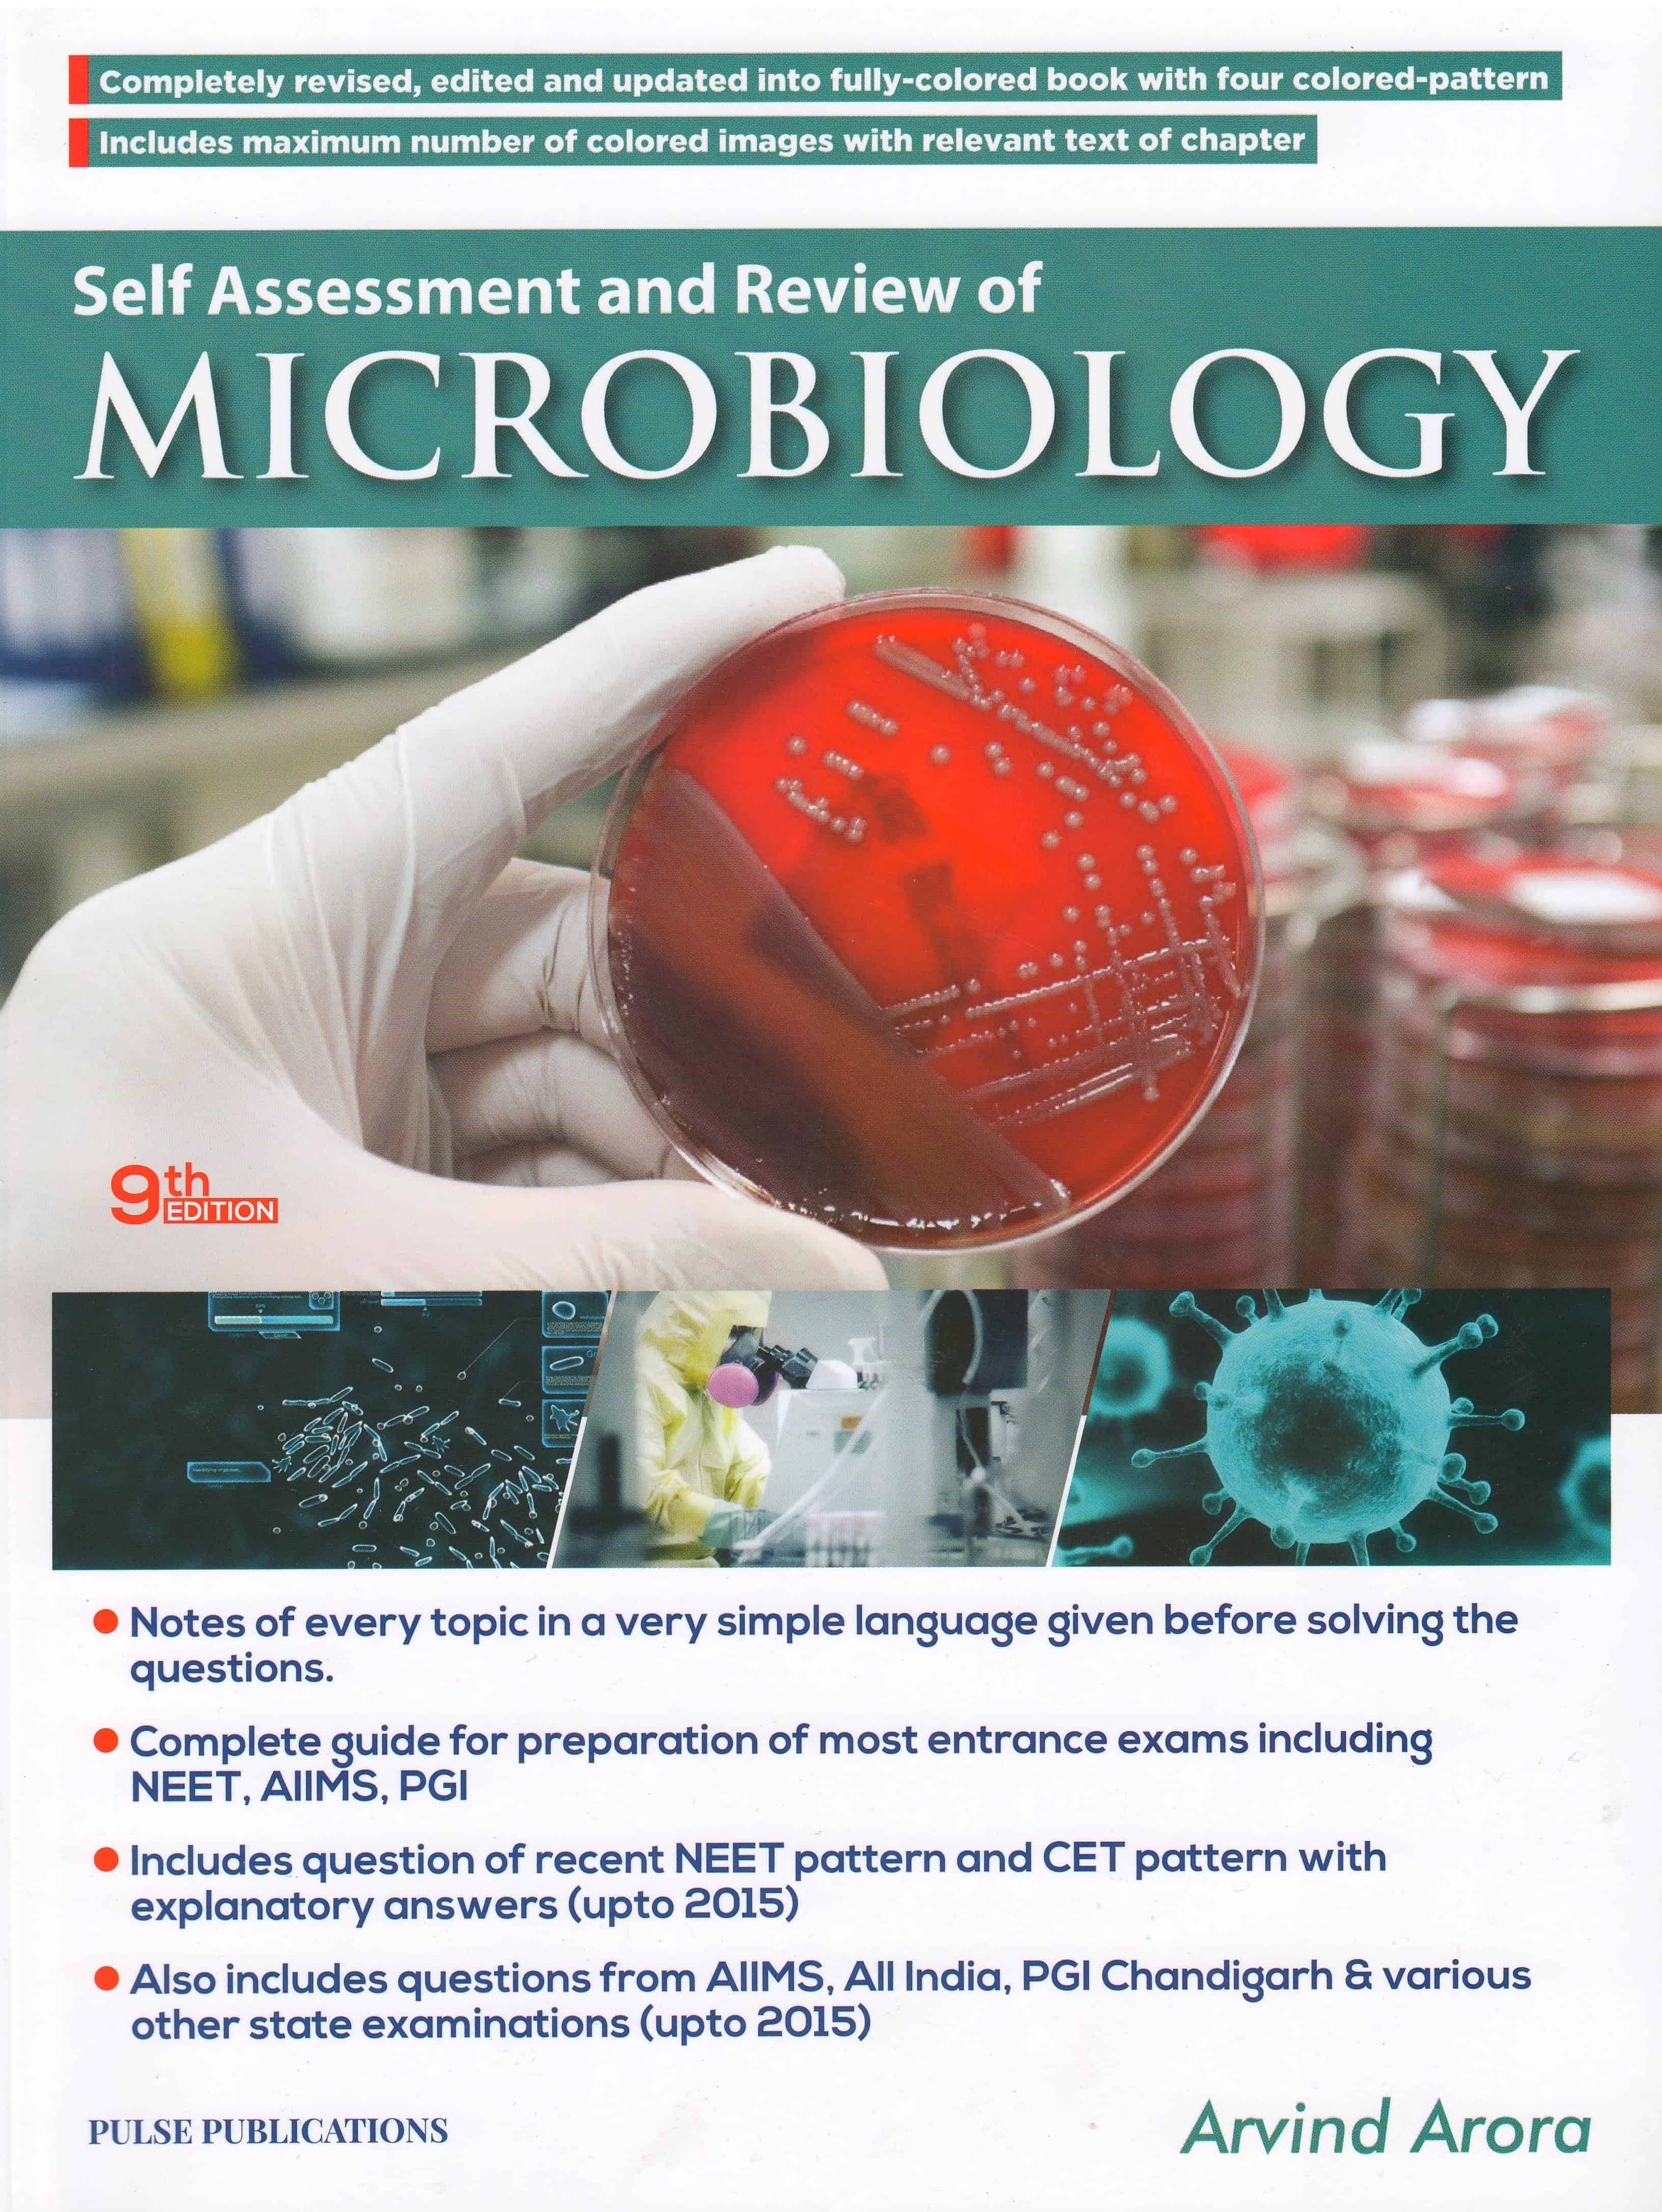 Self-Assessment and Review of Microbiology by Arvind Arora